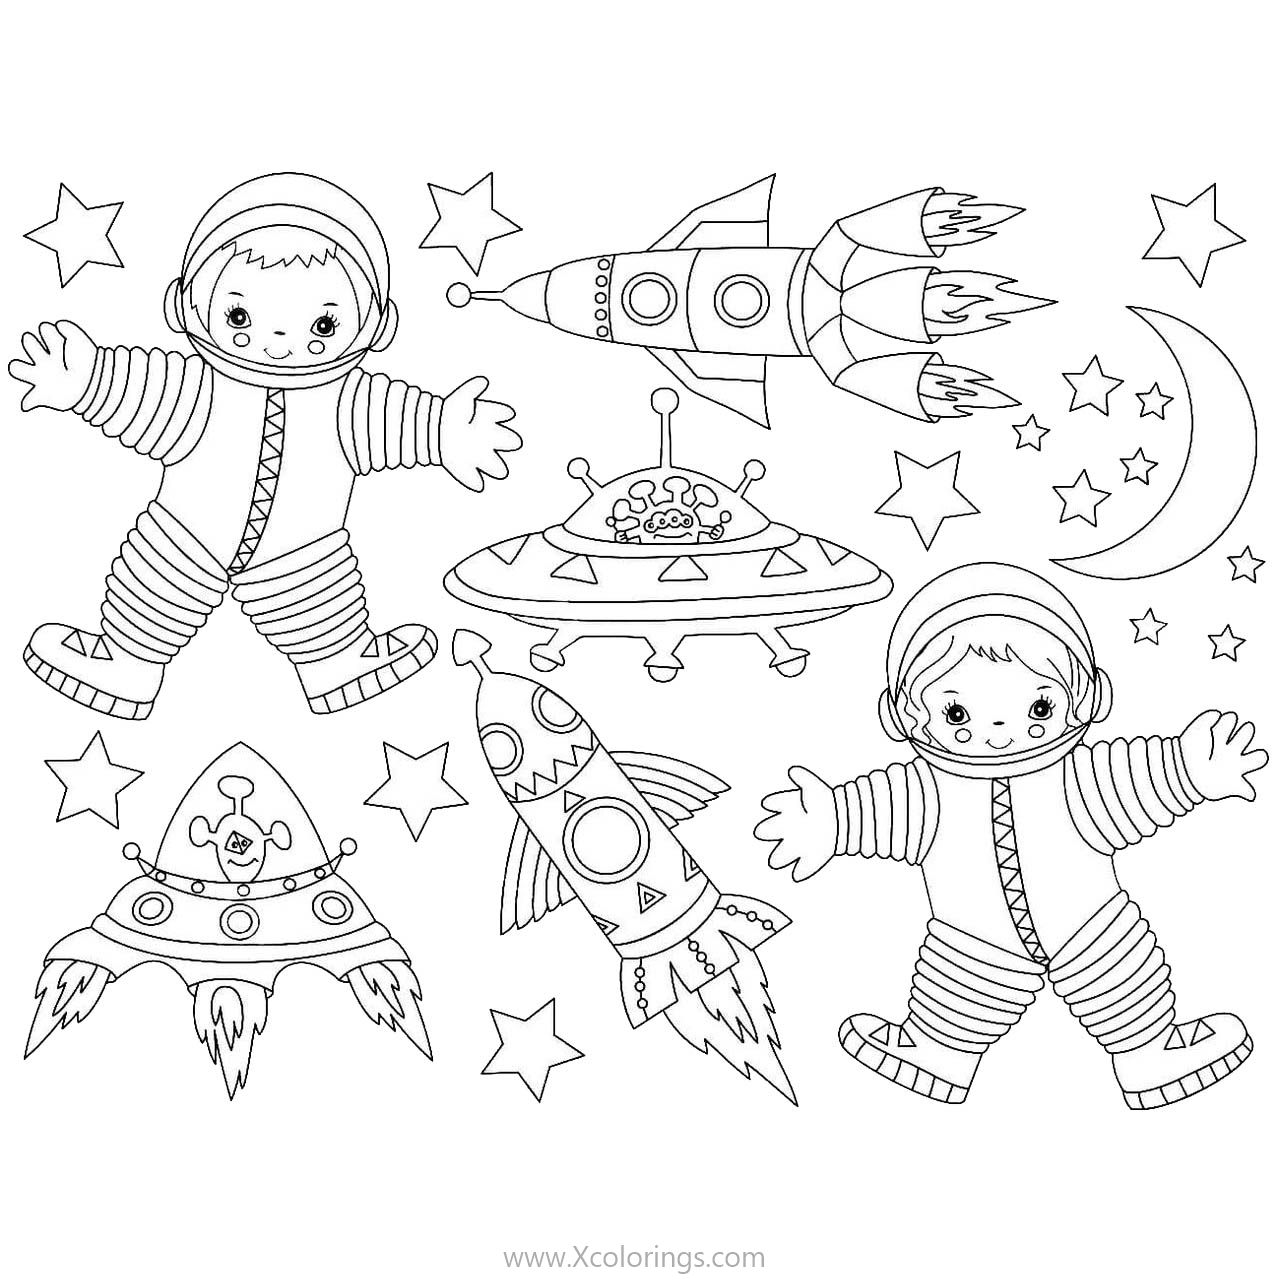 Free Baby Astronauts Coloring Pages with Rockets and UFO printable